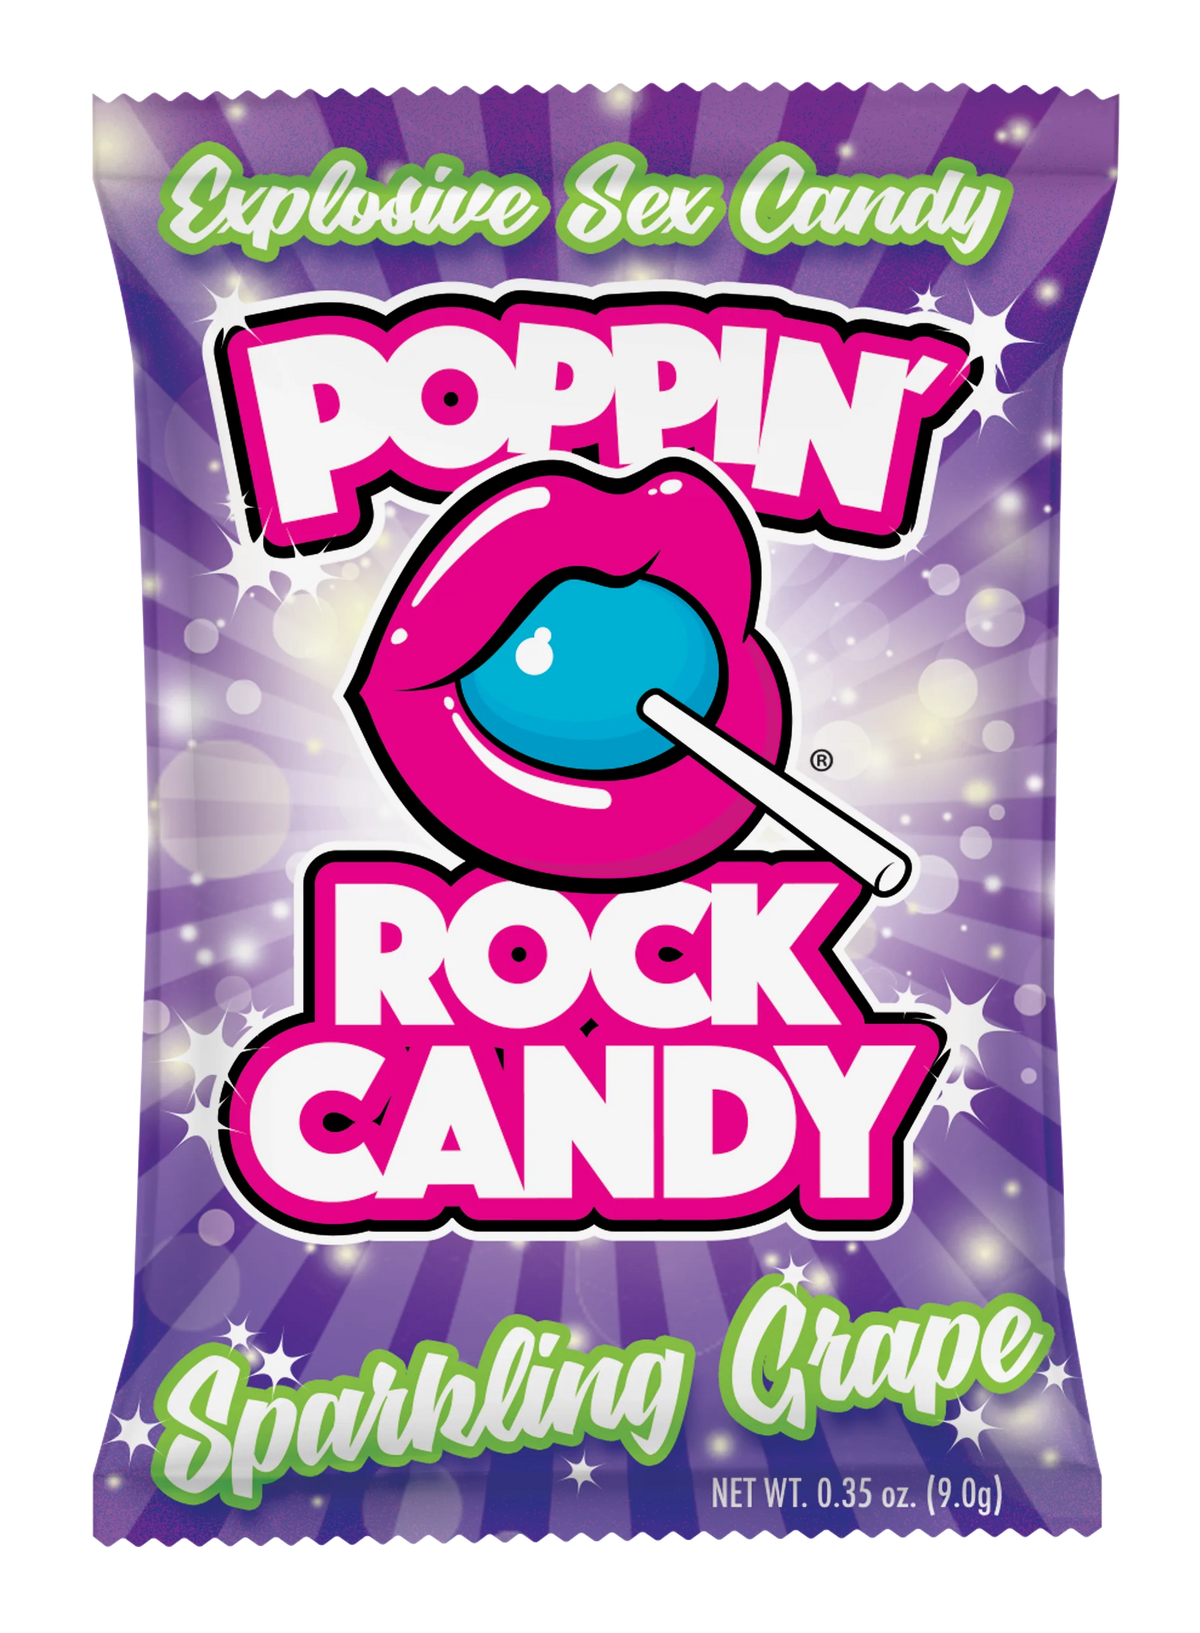 Poppin' Rock Candy - Sparkling Grape